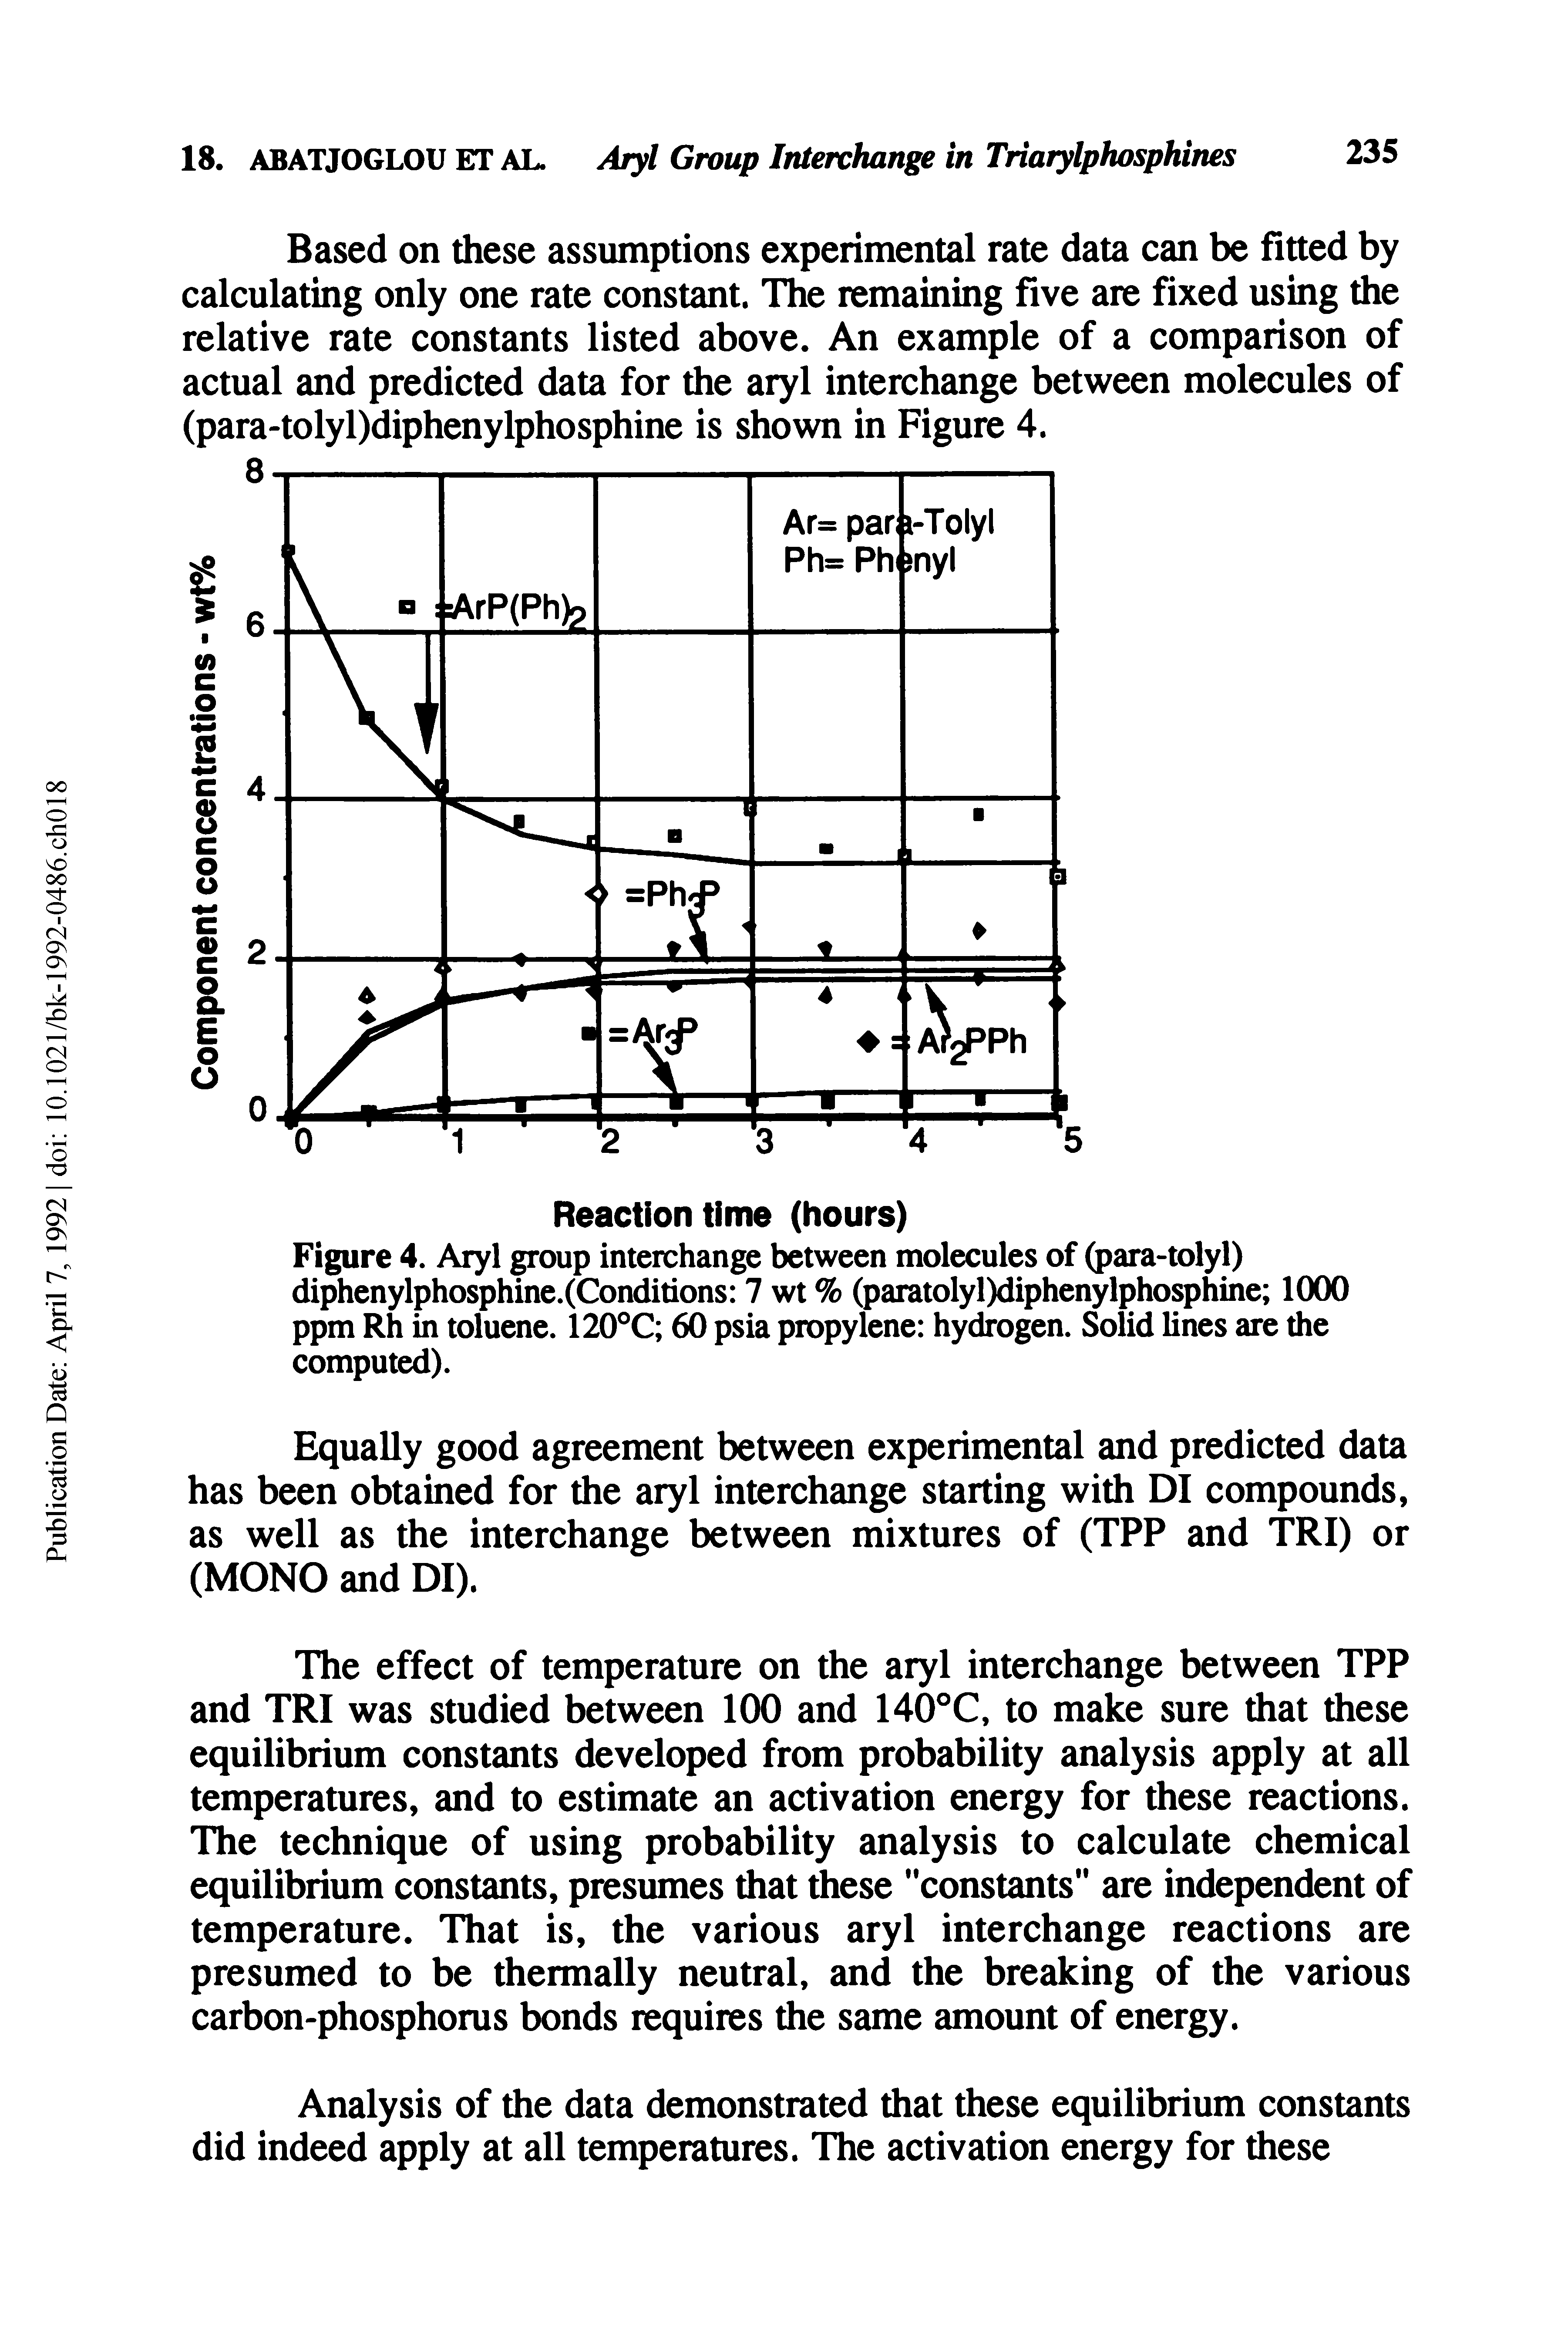 Figure 4. Aryl group interchange between molecules of (para-tolyl) diphenylphosphine.(Conditions 7 wt % (paratolyl)diphenylphosphine 1000 ppm Rh in toluene. 120°C 60 psia propylene hydrogen. Solid lines are the computed).